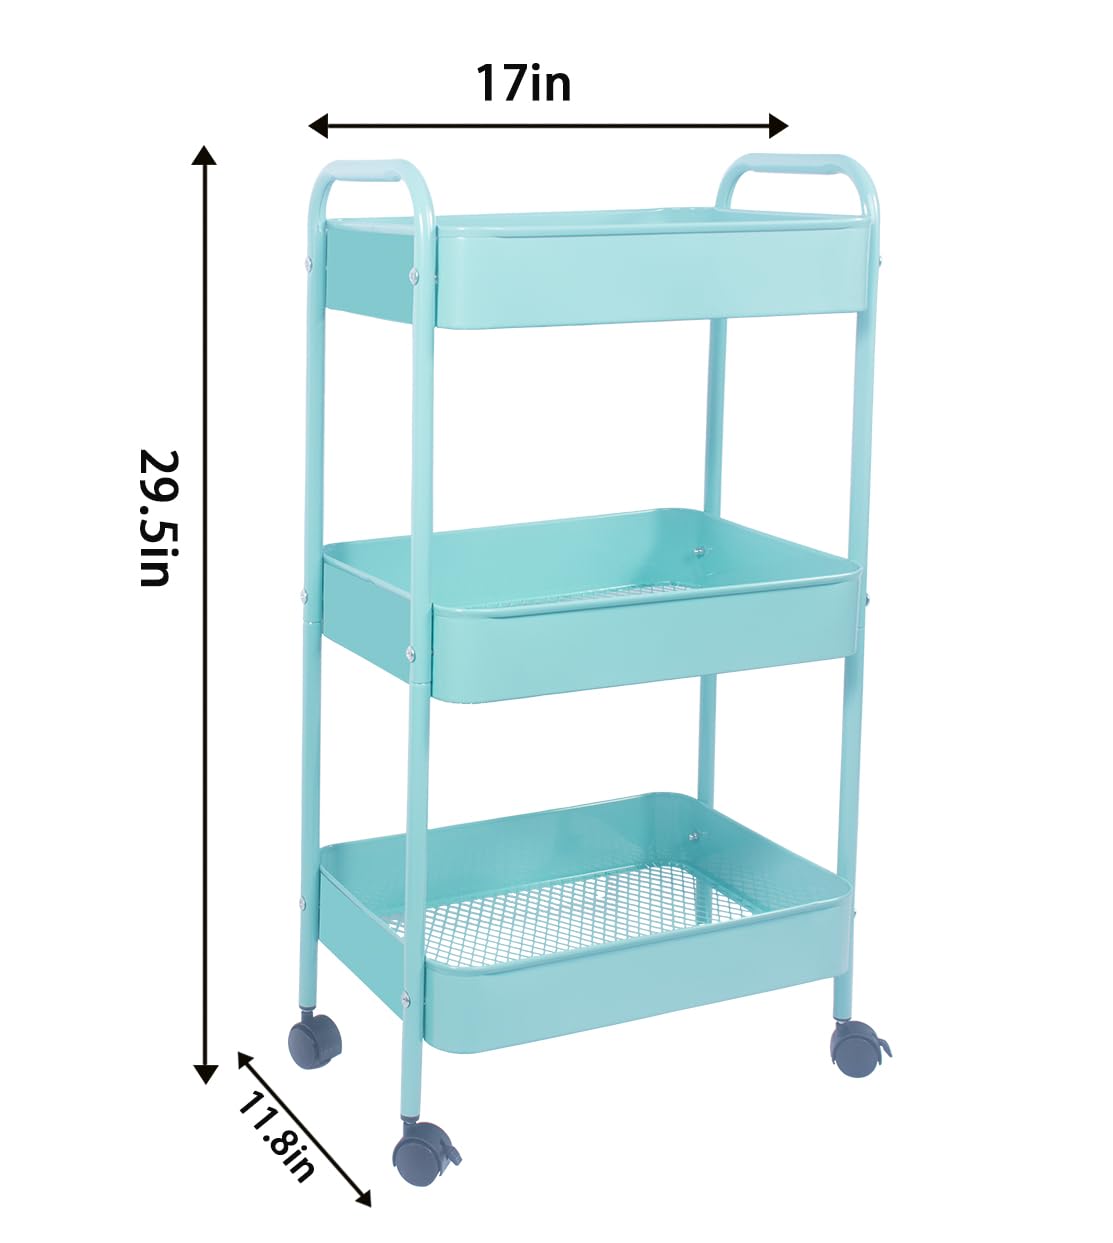 XIUSHE 3-Tier Metal Utility Cart Rolling Storage Organizer, Blue, Portable, Sturdy, Indoor Use